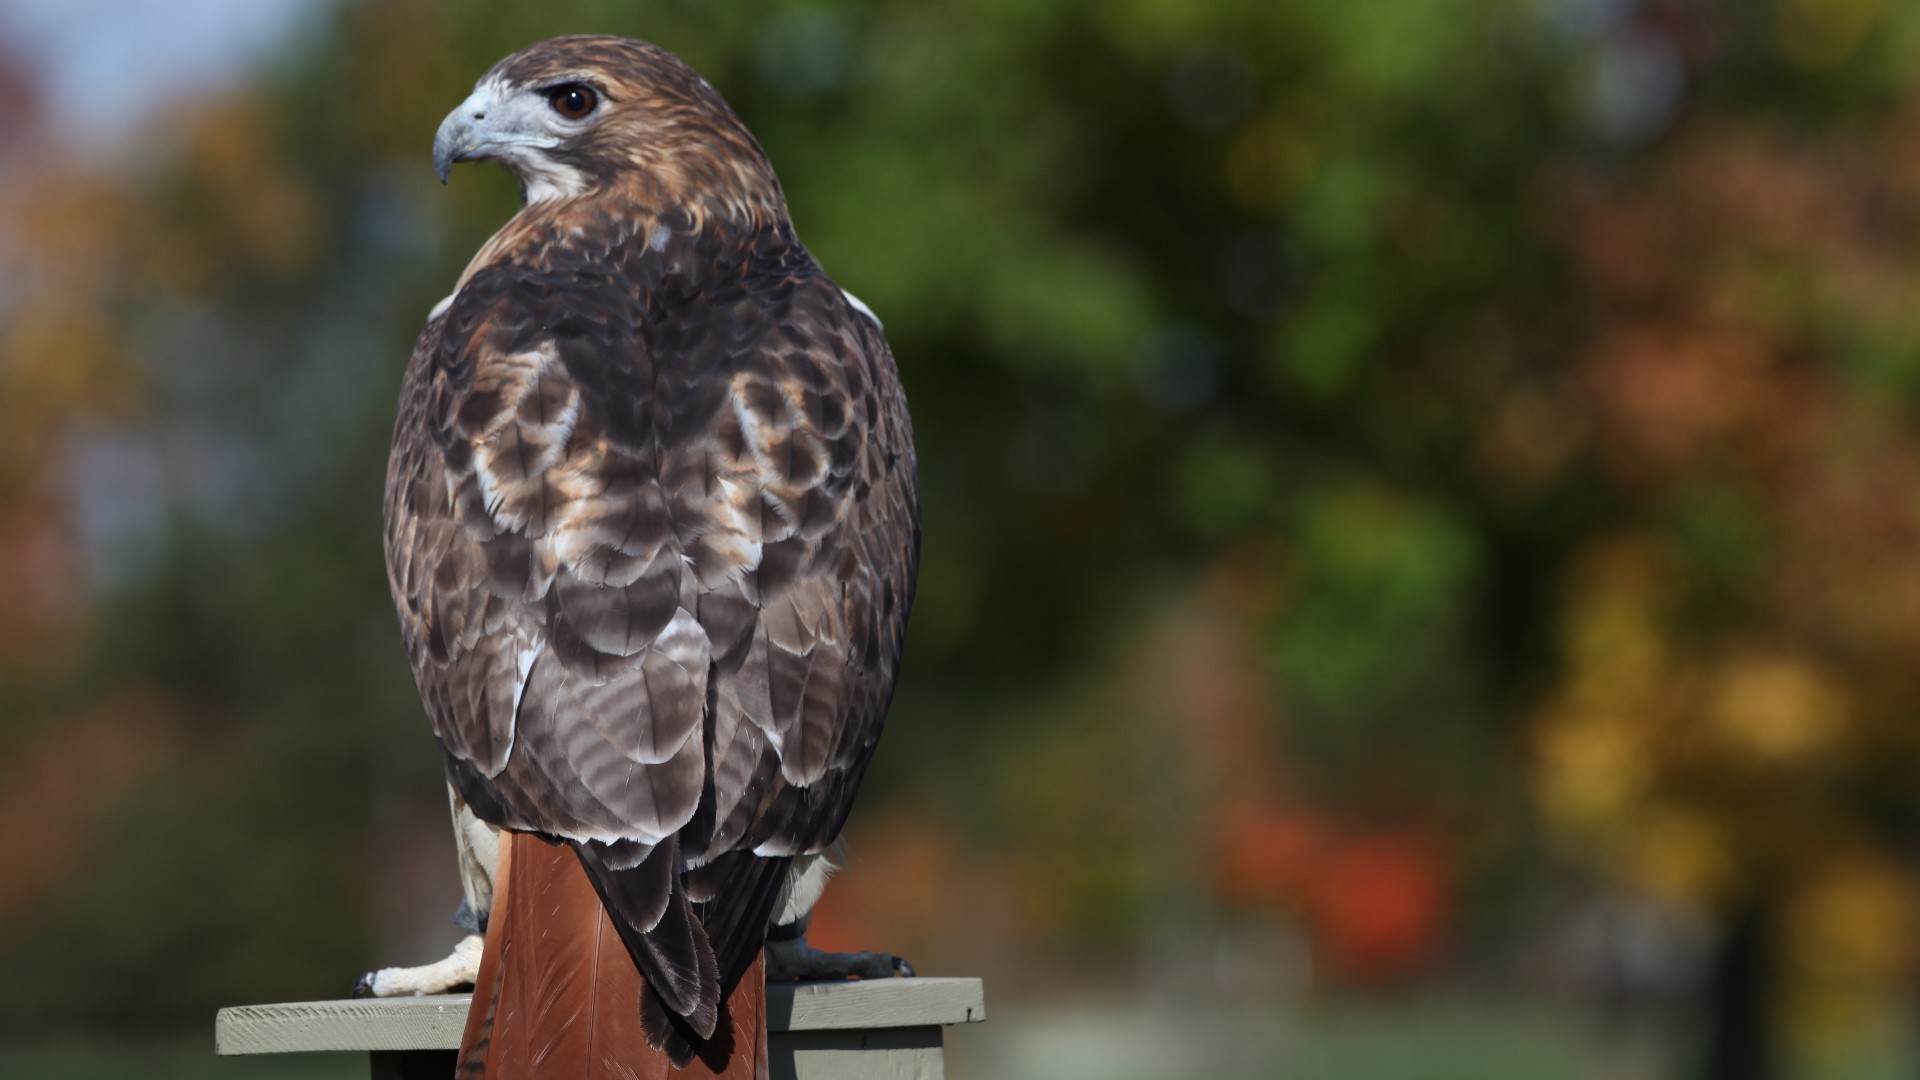 Hawks and other birds of prey can be feisty while defending their nests.